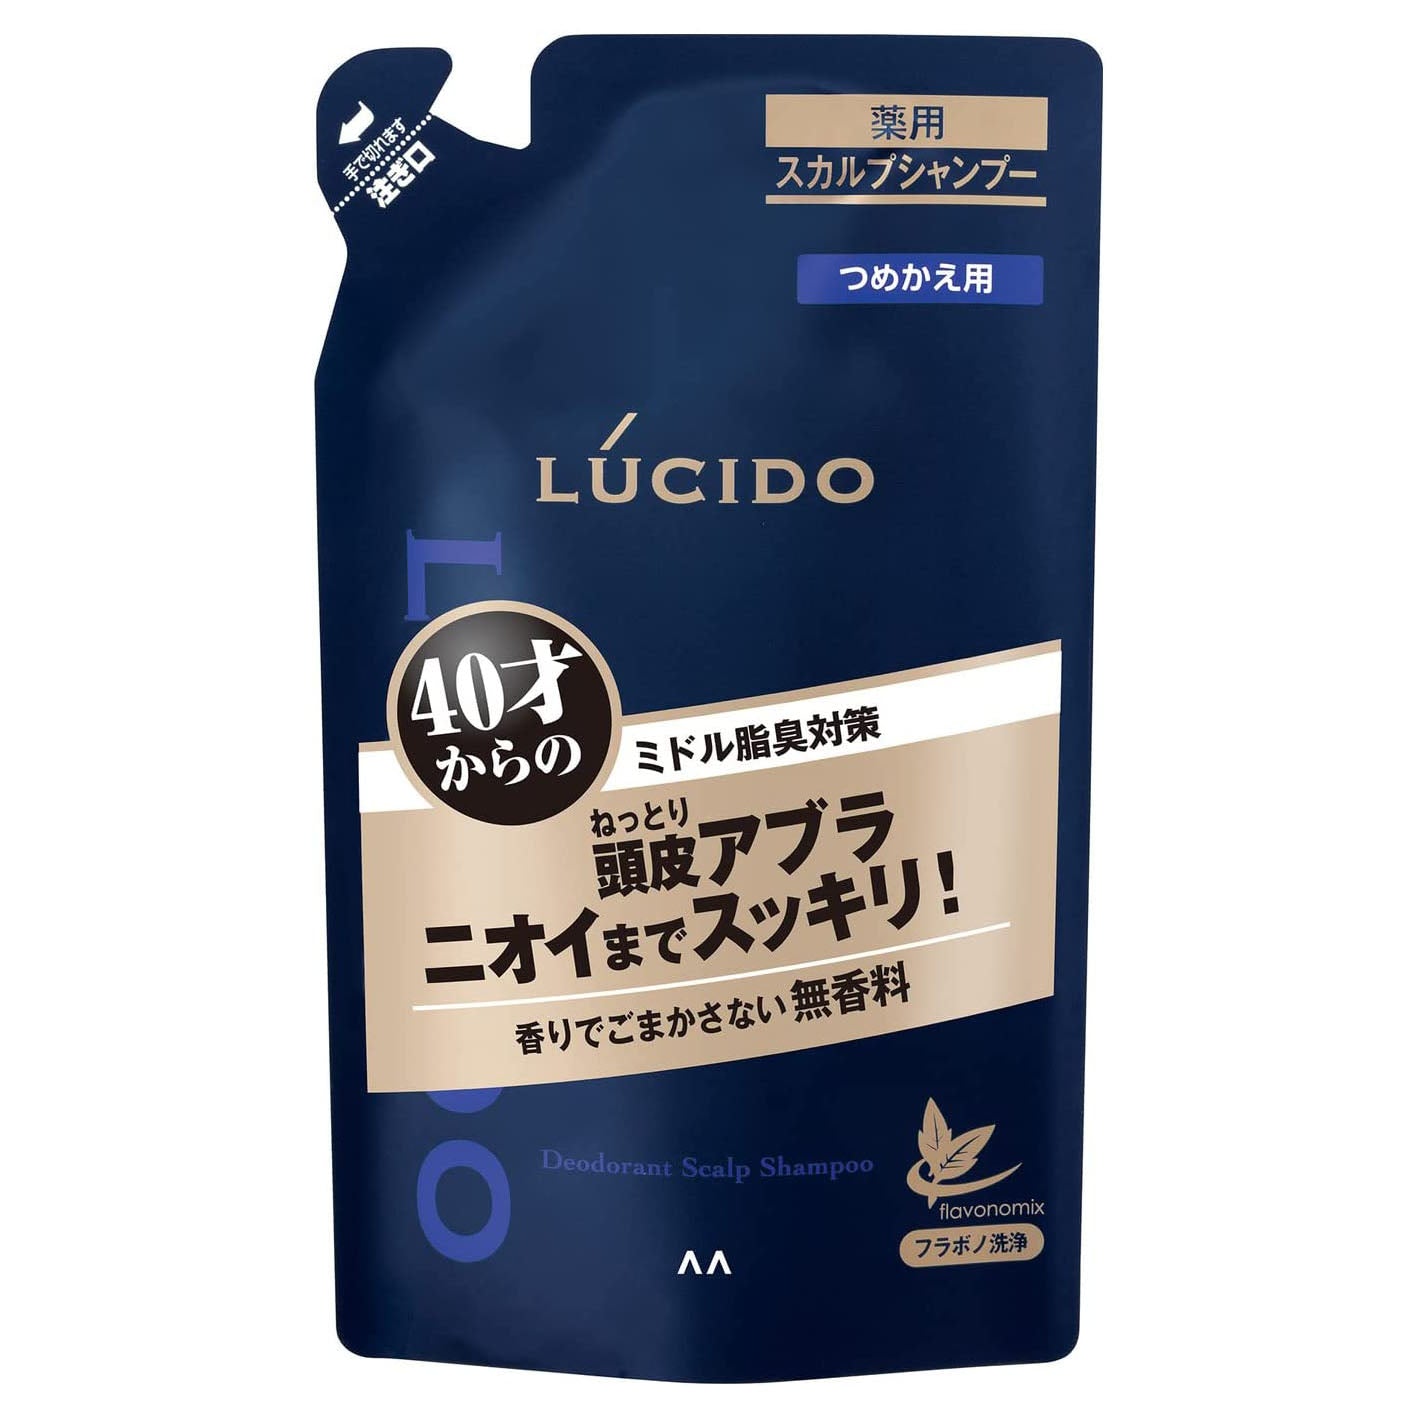 Lucido Medicated Scalp Deodorant Shampoo 380ml - Refill - Harajuku Culture Japan - Japanease Products Store Beauty and Stationery